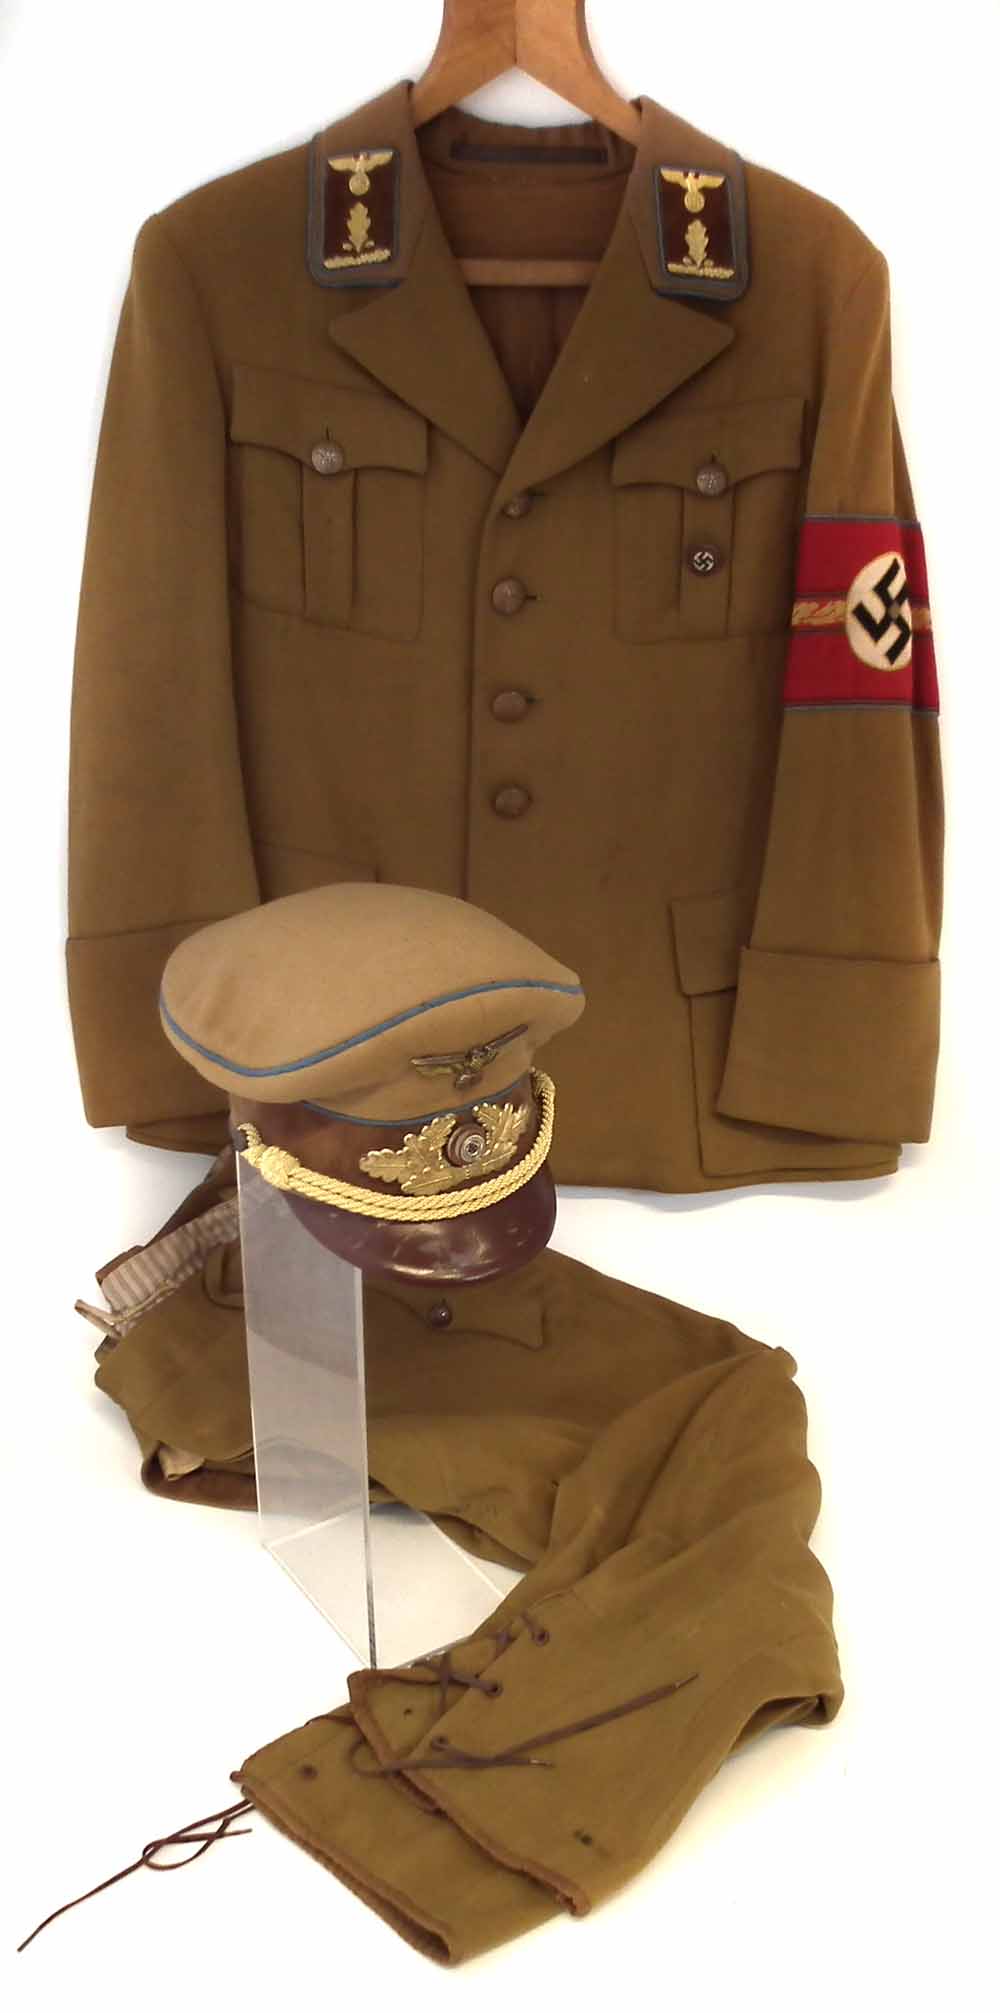 German Third Reich Nazi Party uniform for a Senior Section Leader Ault Leiter, to include a peaked